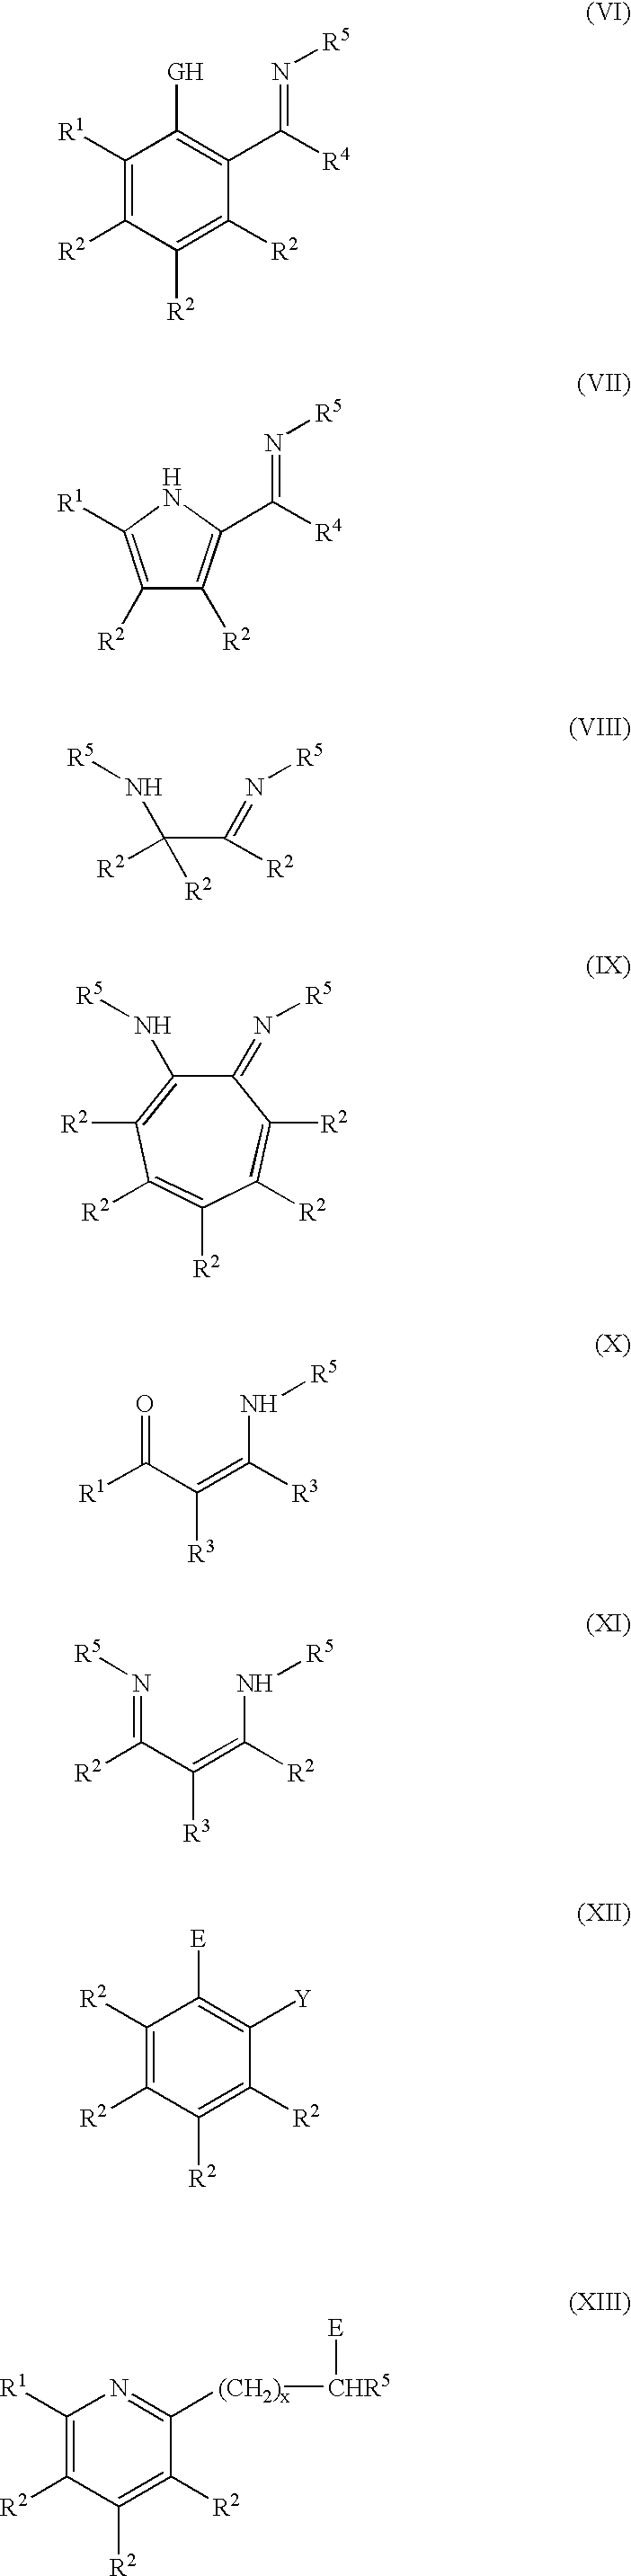 Olefin polymerization catalysts and processes for making and using same